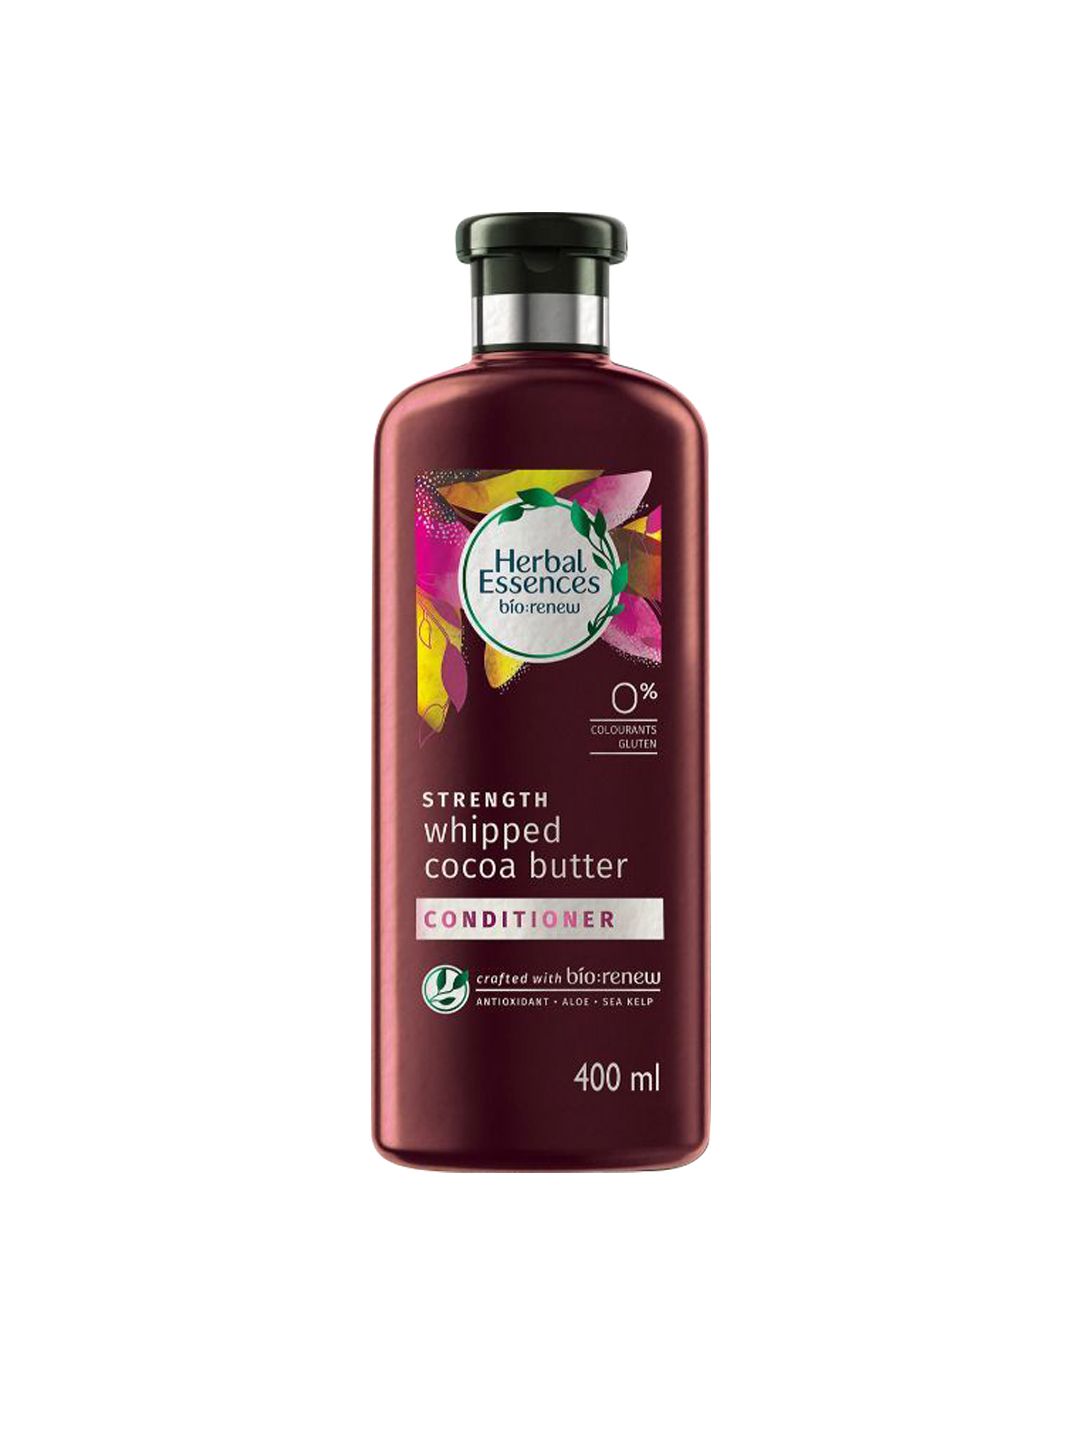 Herbal Essences Bio Renew Unisex Strength Whipped Cocoa Butter Conditioner 400 ml Price in India